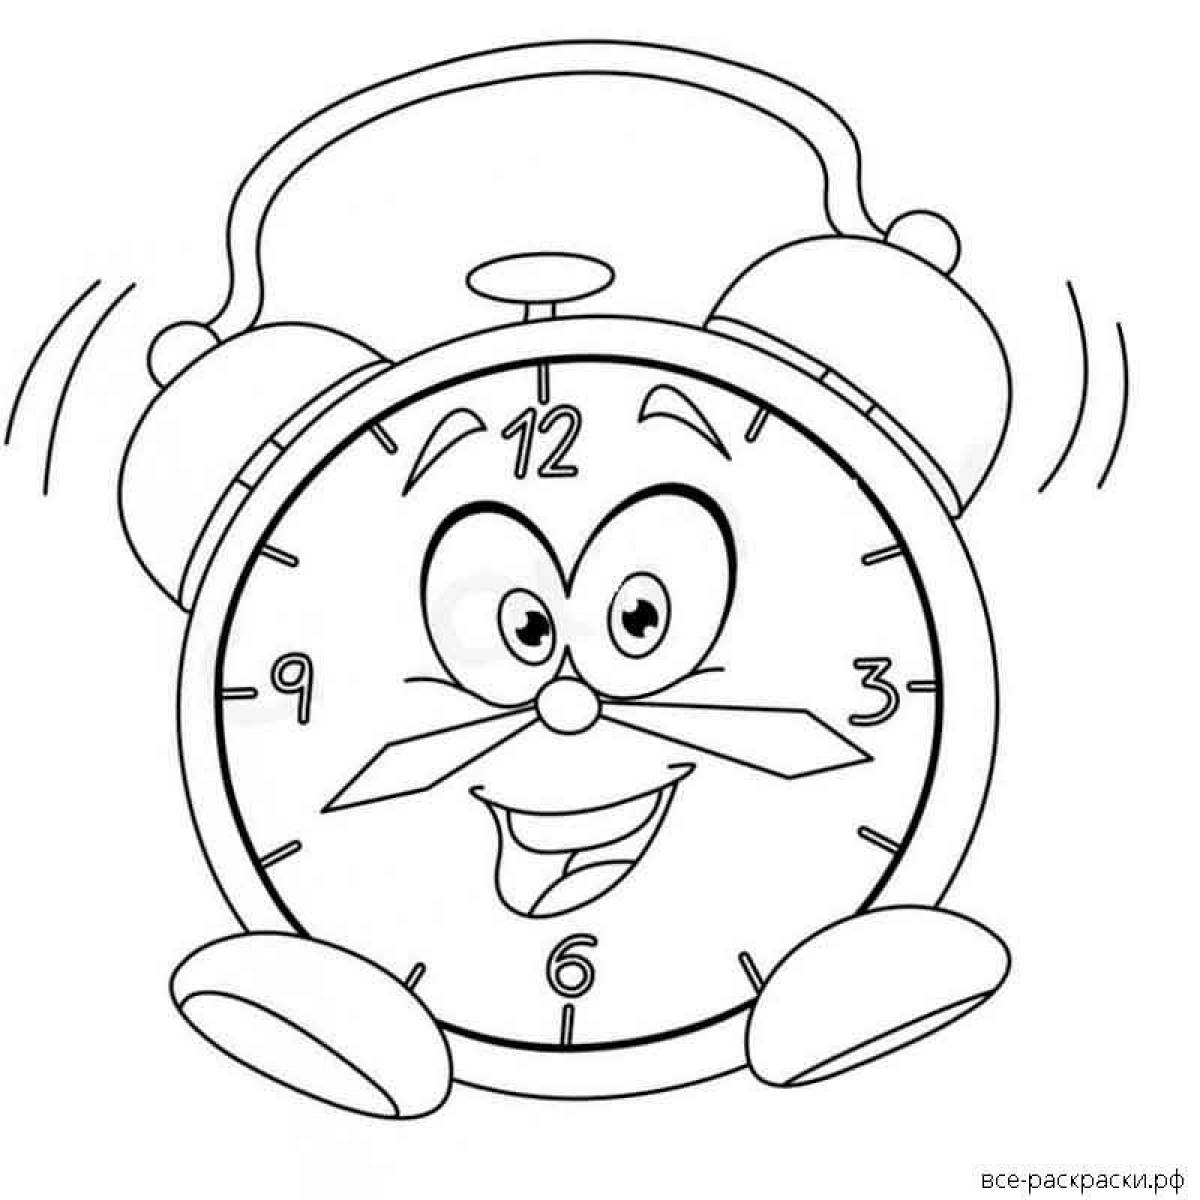 Colorful alarm clock coloring page